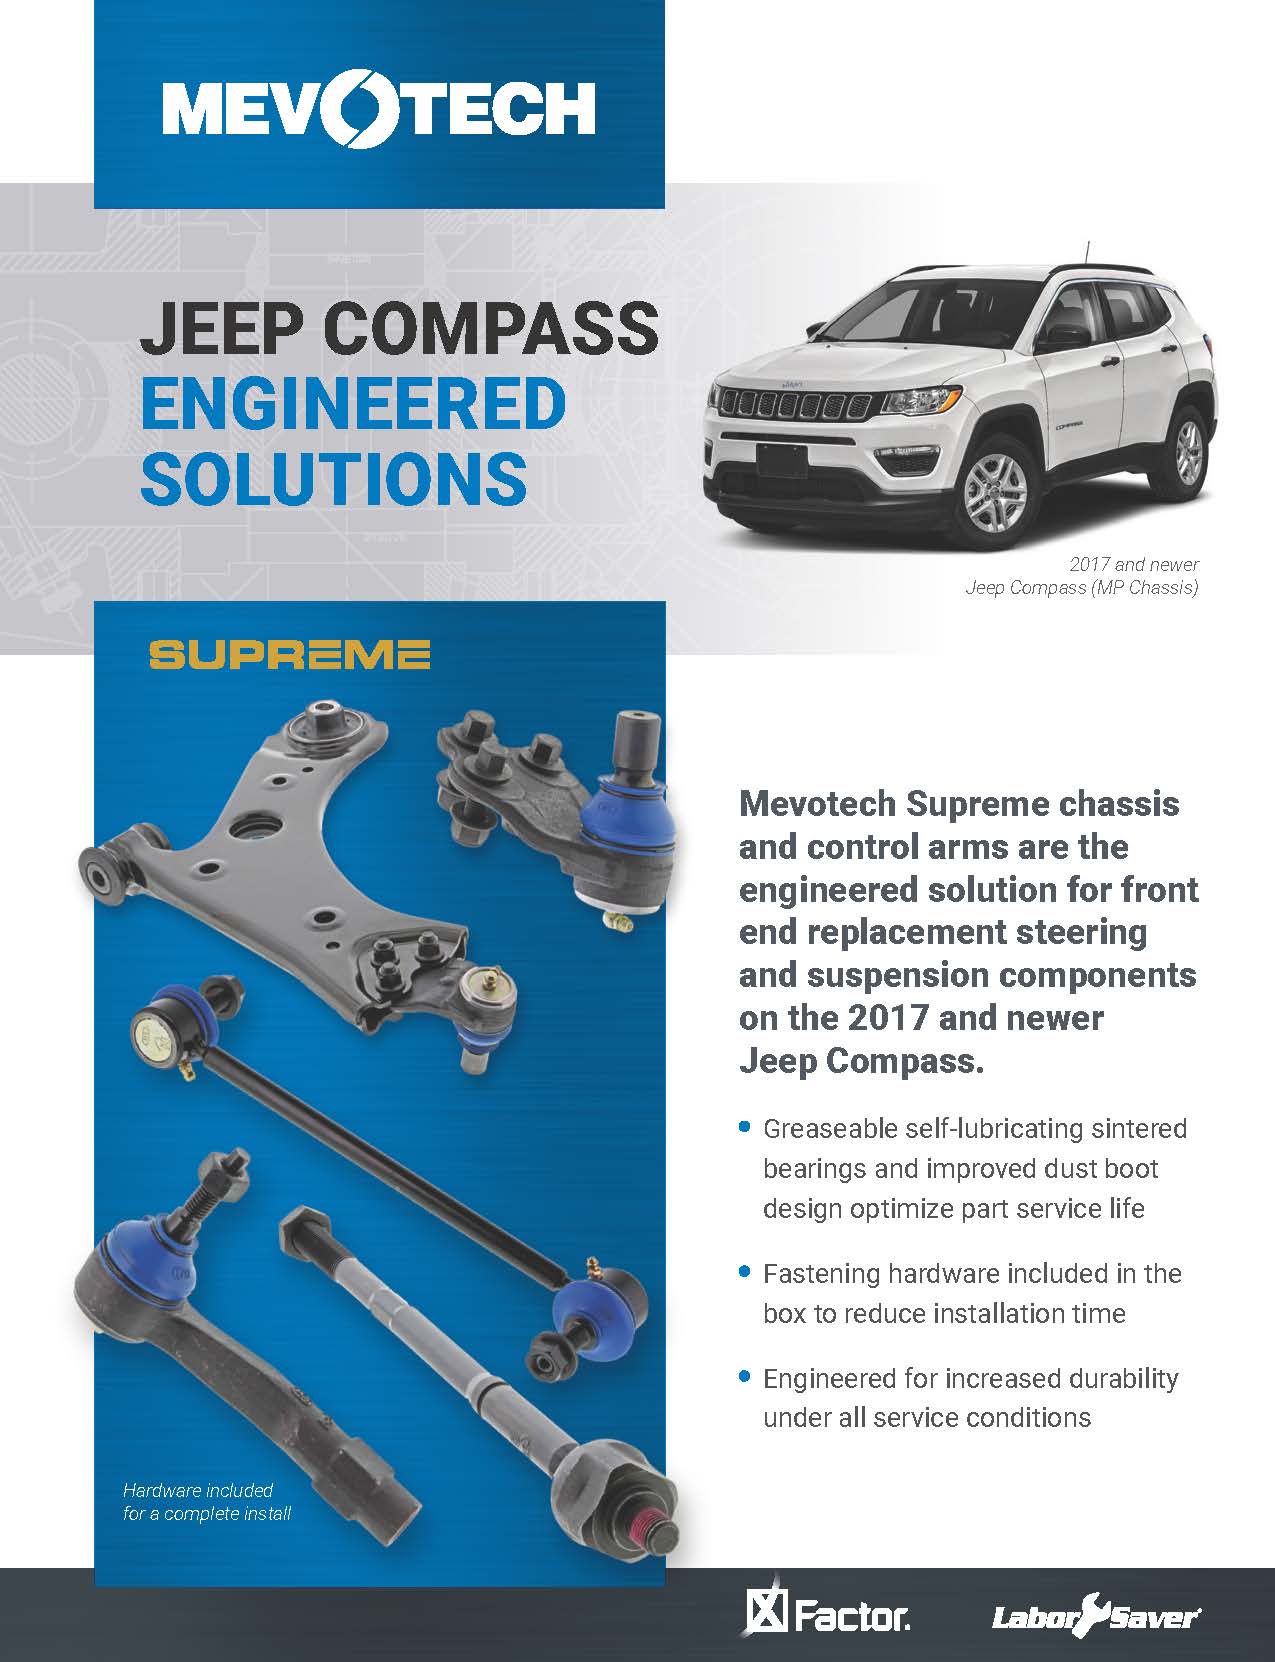 JEEP COMPASS ENGINEERED SOLUTIONS